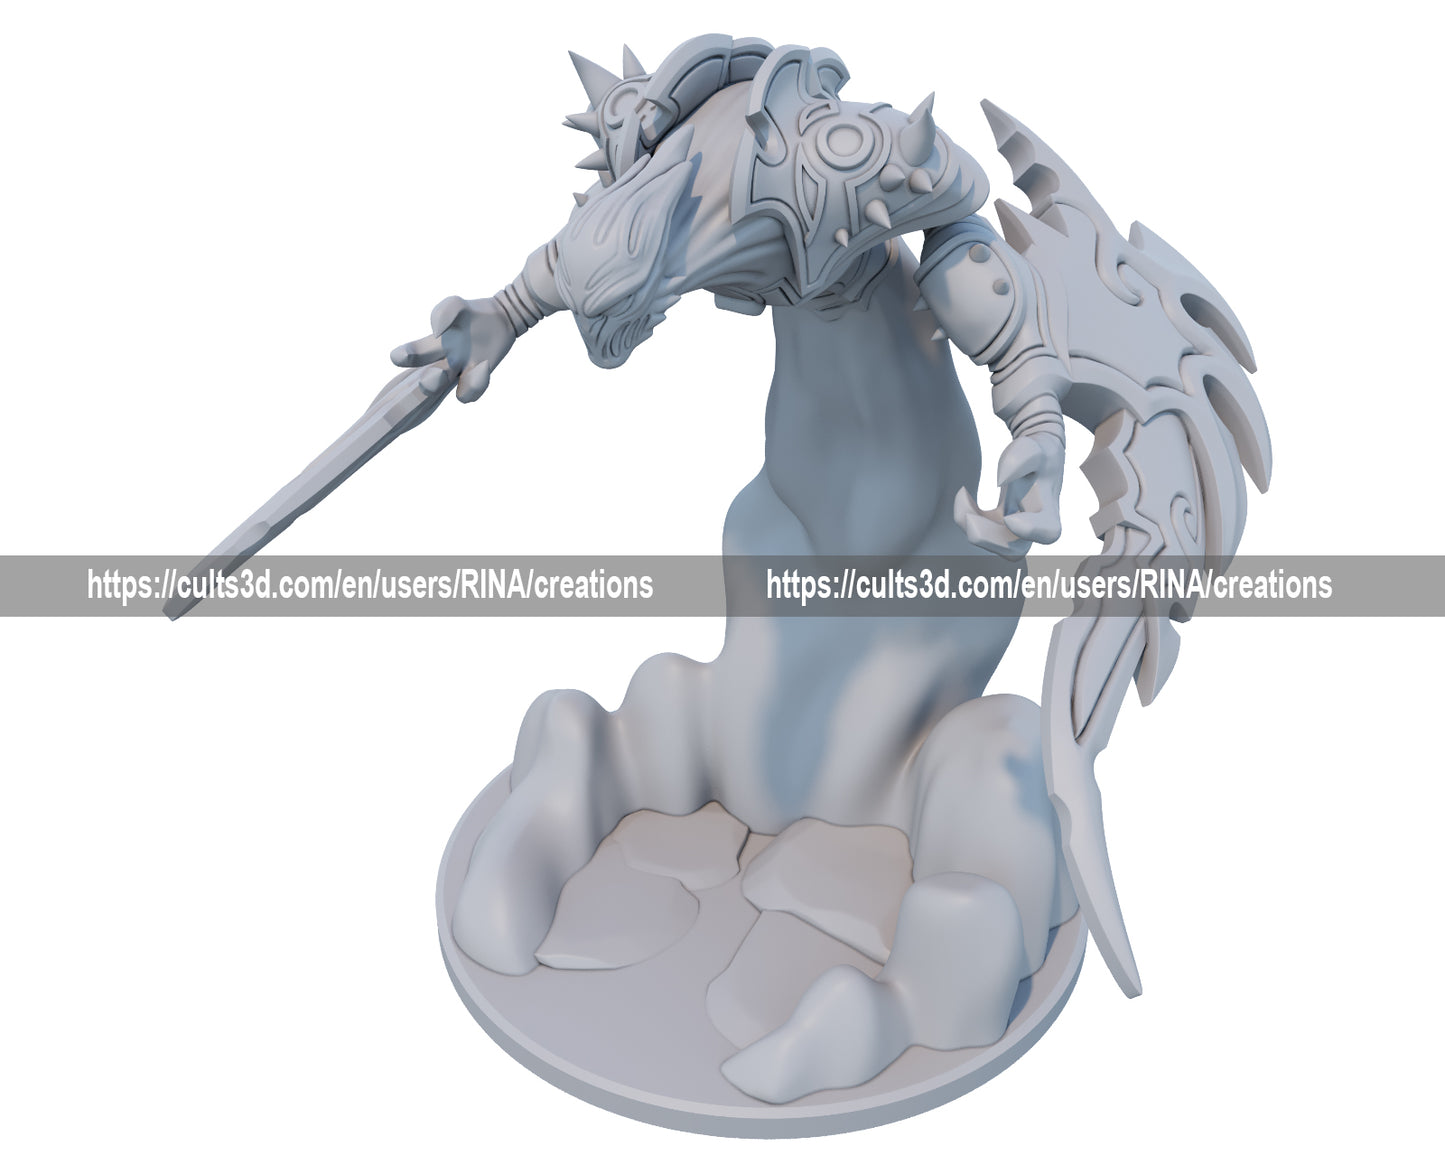 Nocturne 3D-printed League of Legends champion figure. Decorate your gaming setup or home with your favorite League of Legends champion! Choose between the unpainted version, perfect for you to paint yourself, or the hand-painted version by a professional painter. Order your figure today!